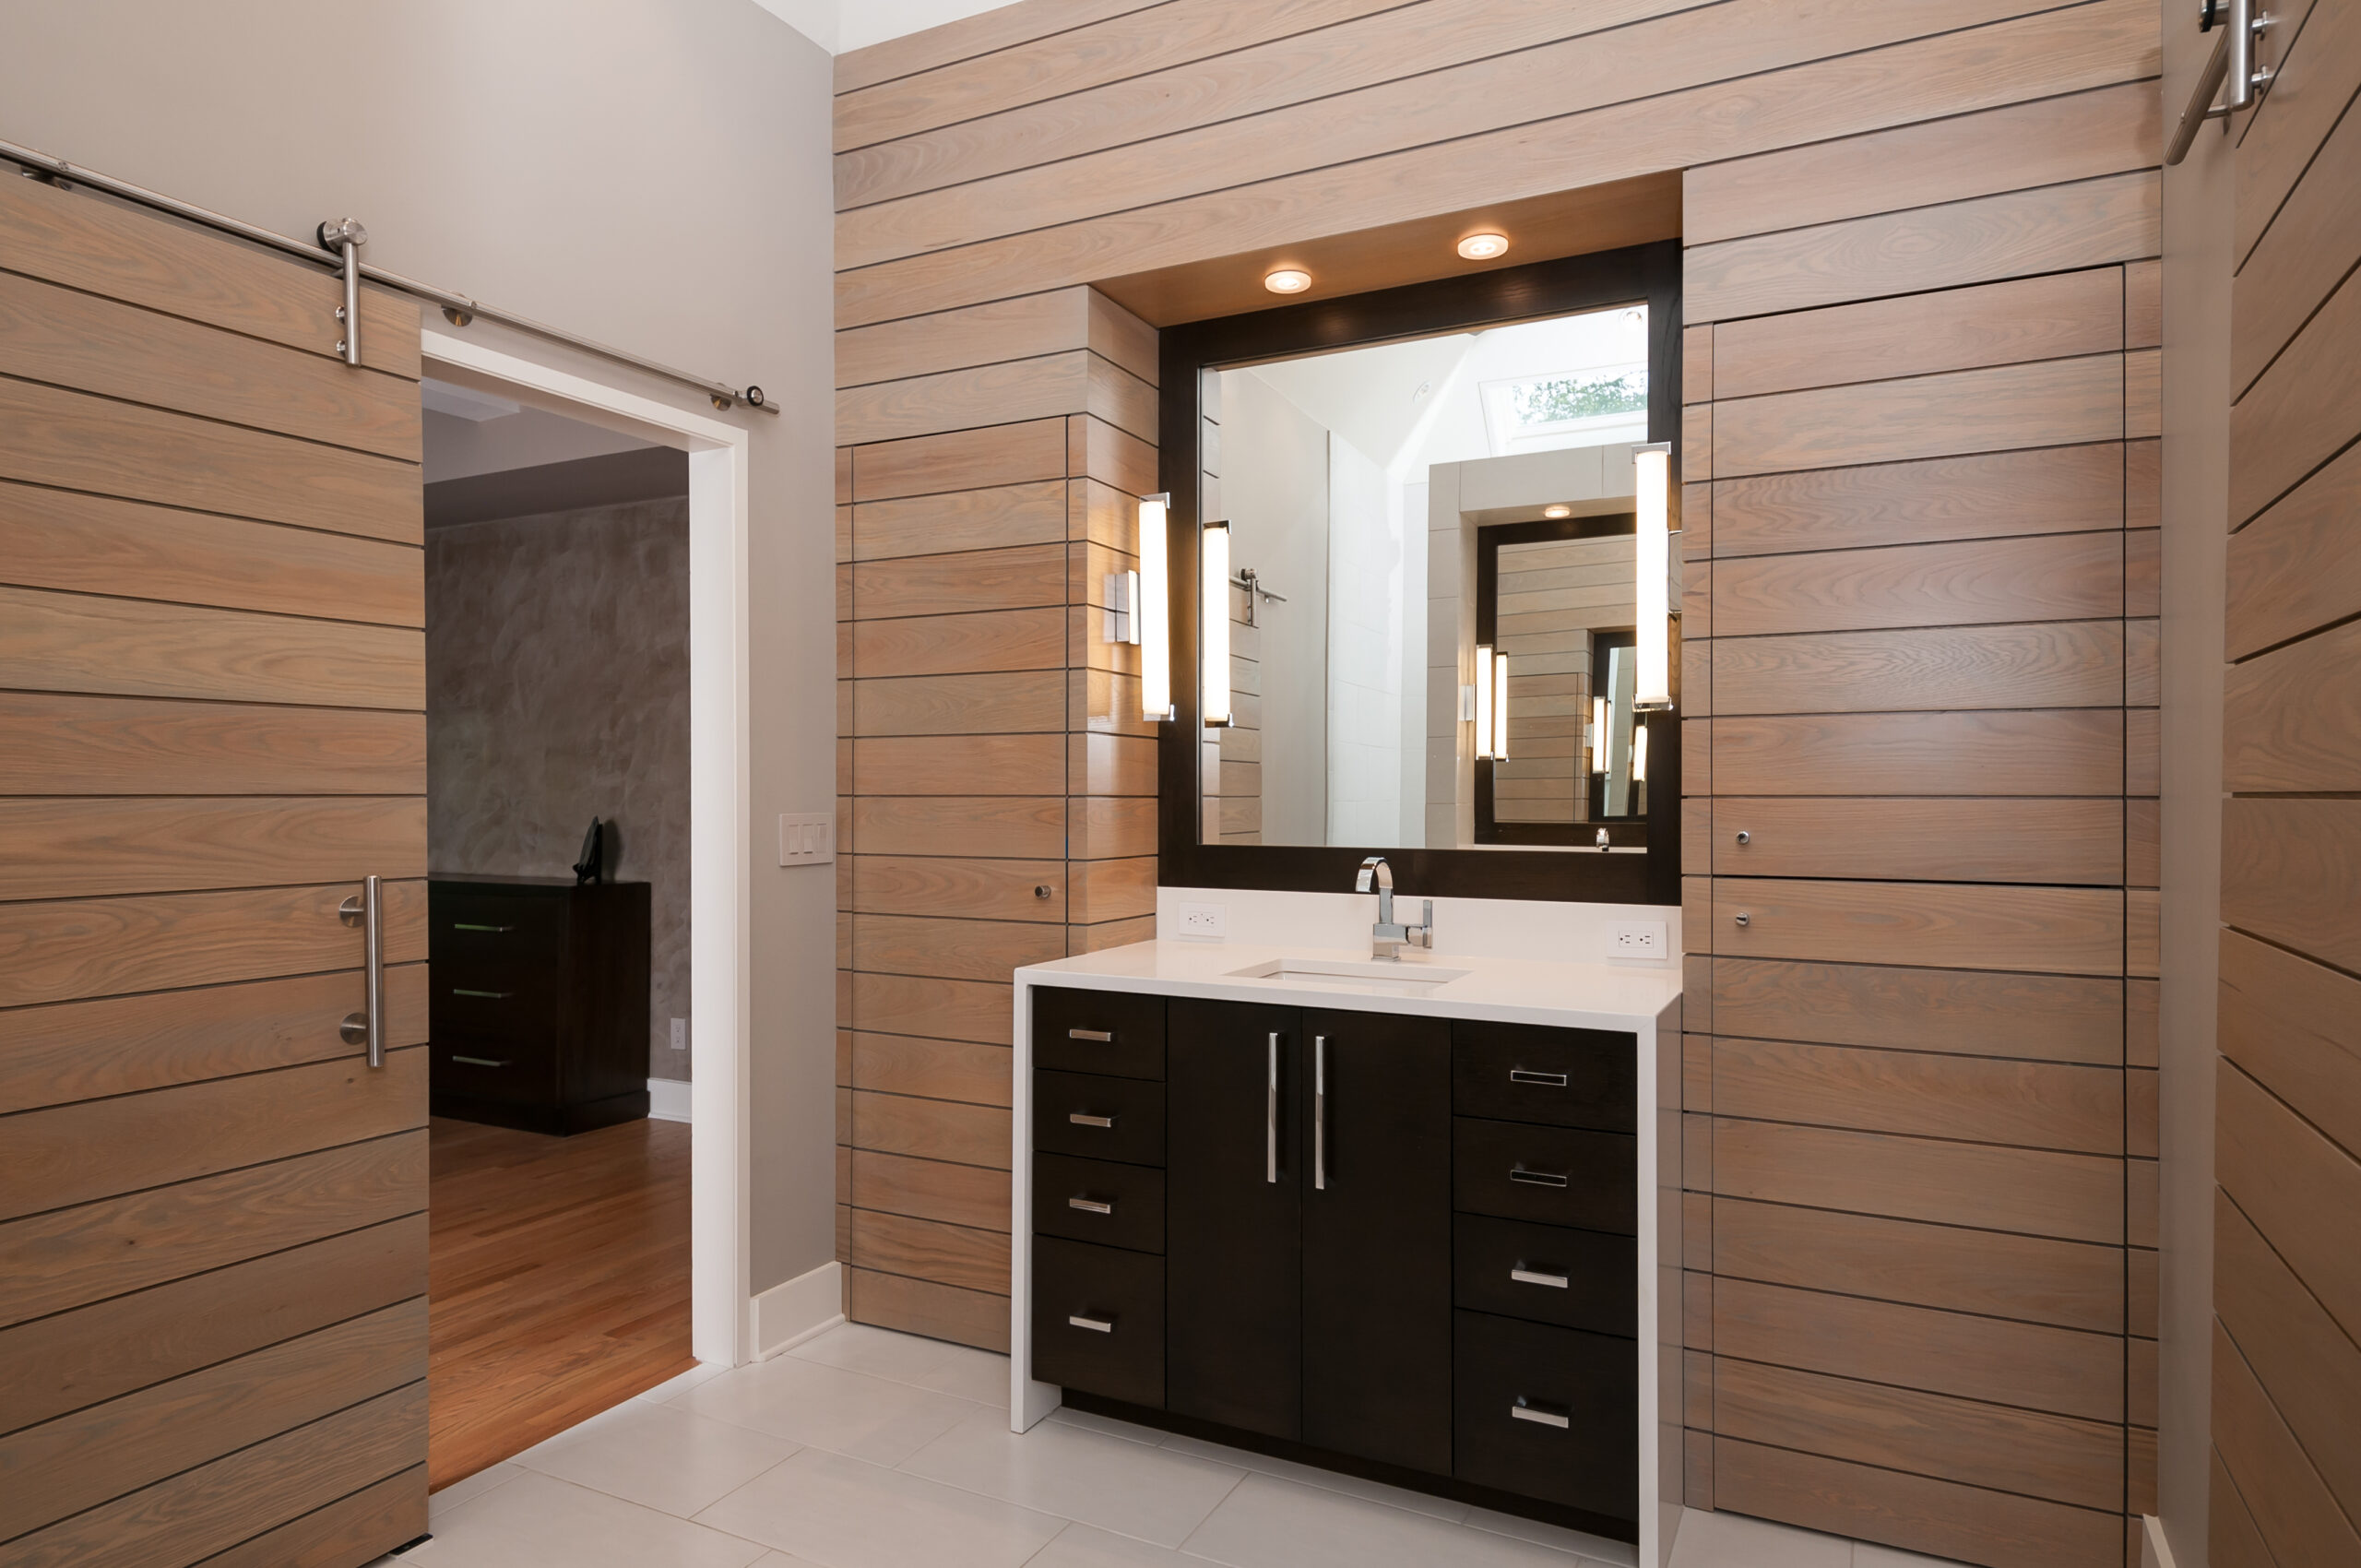 Contemporary primary bathroom with vanity and wood-paneled walls and door